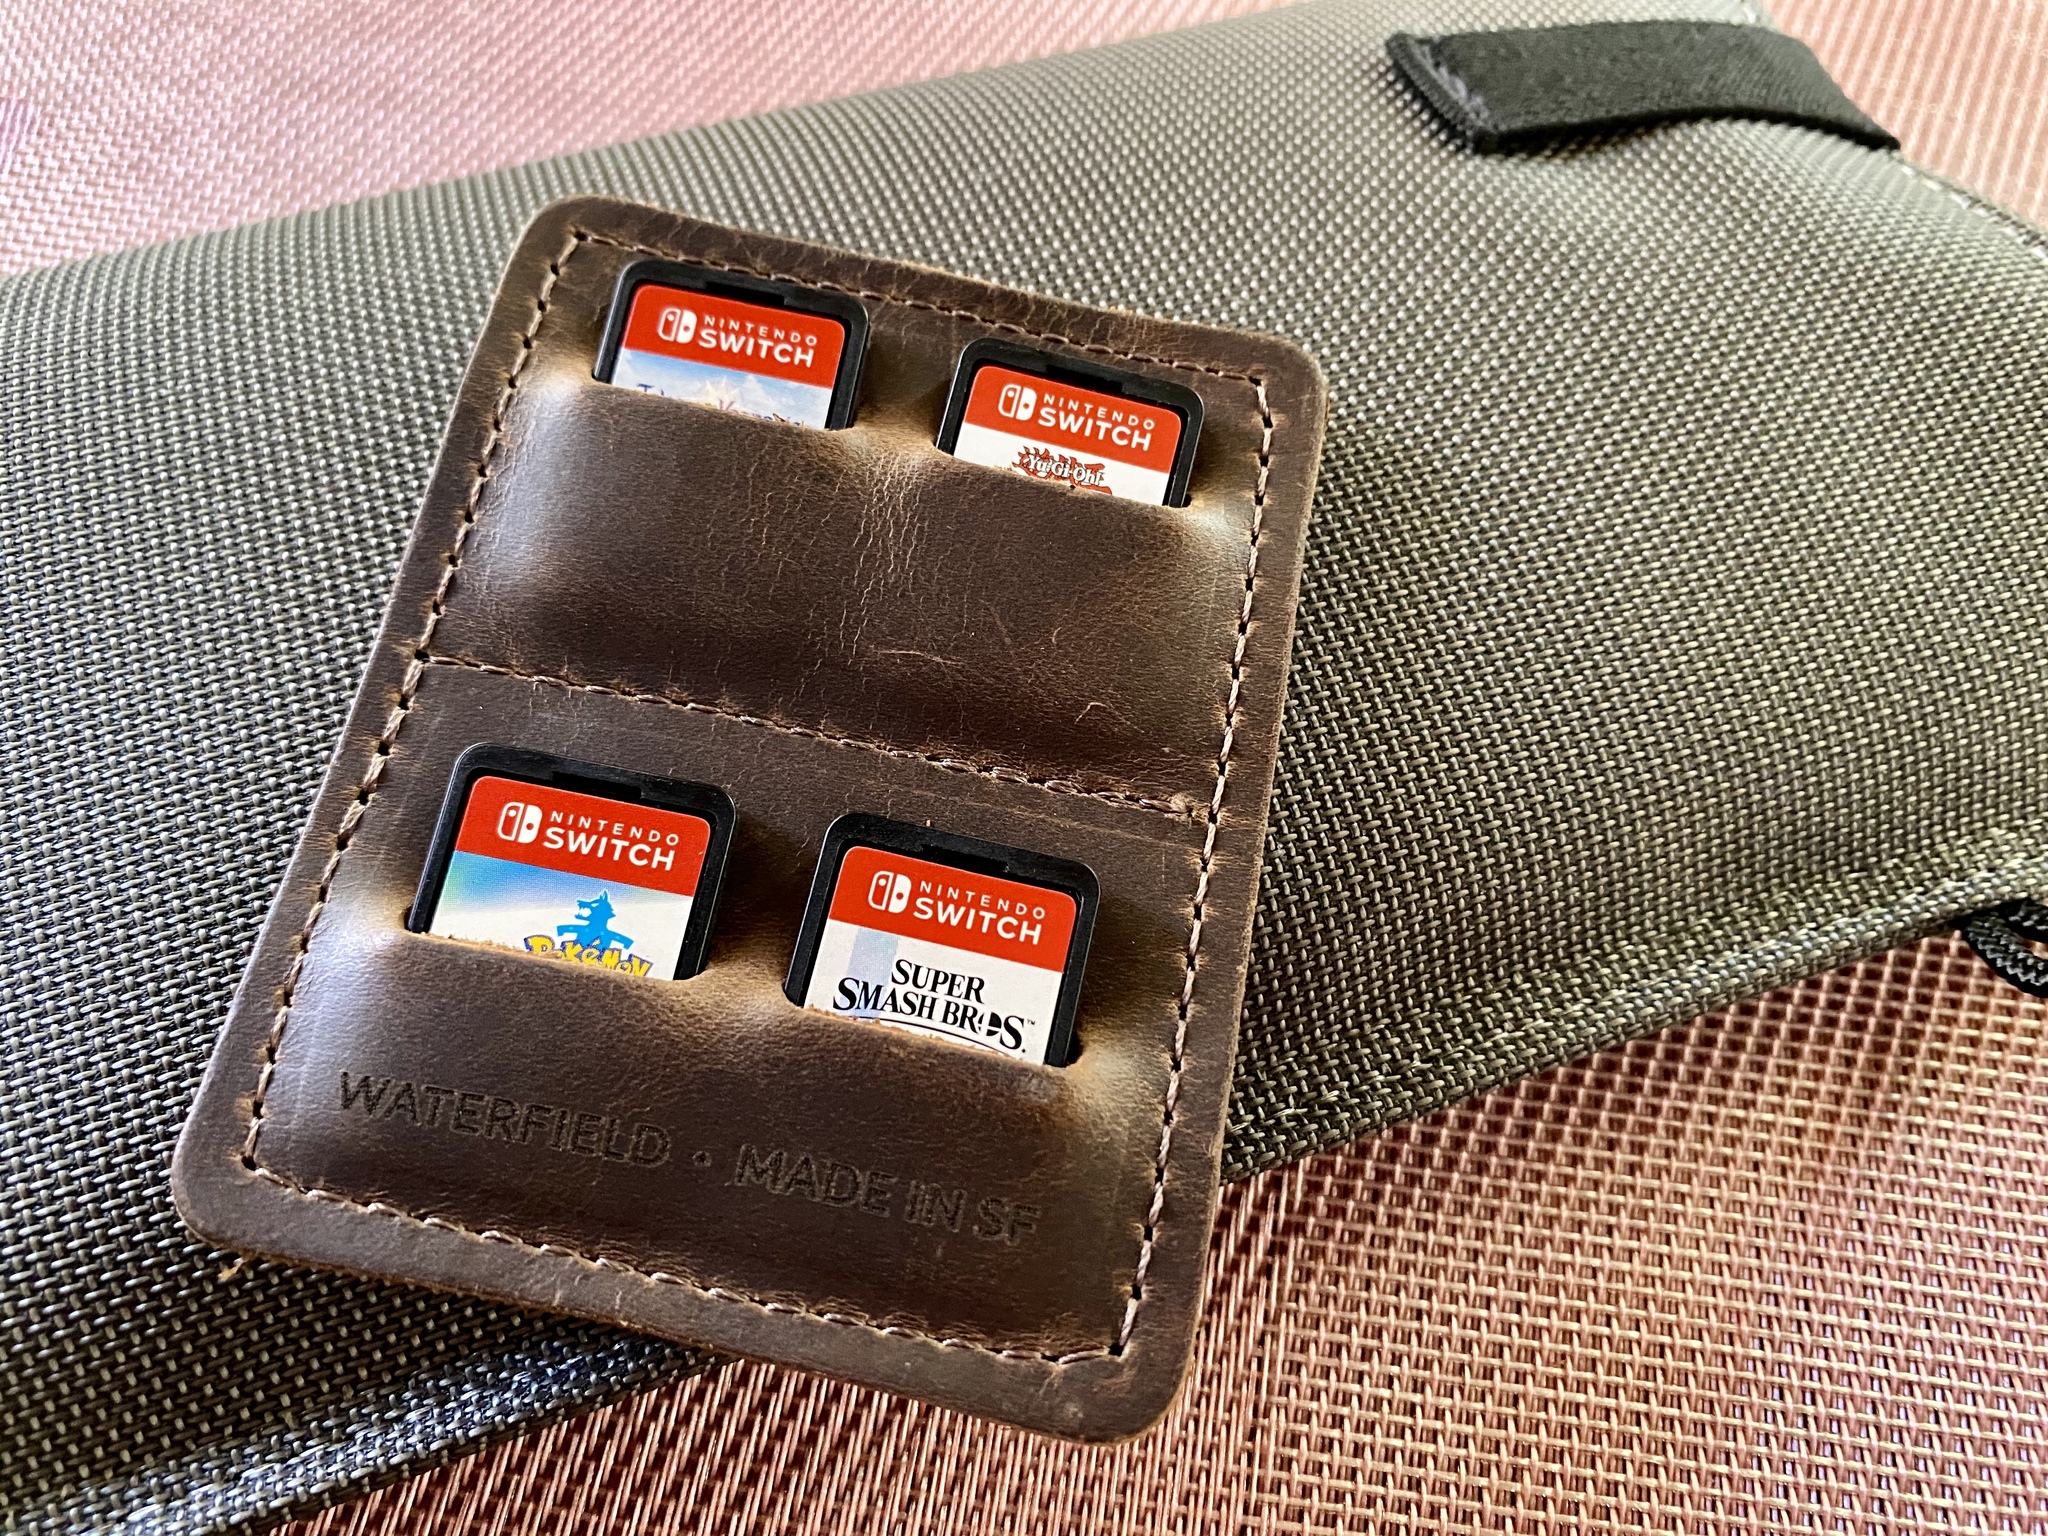 Waterfield Designs Dash Express Game Card Holder Up Close